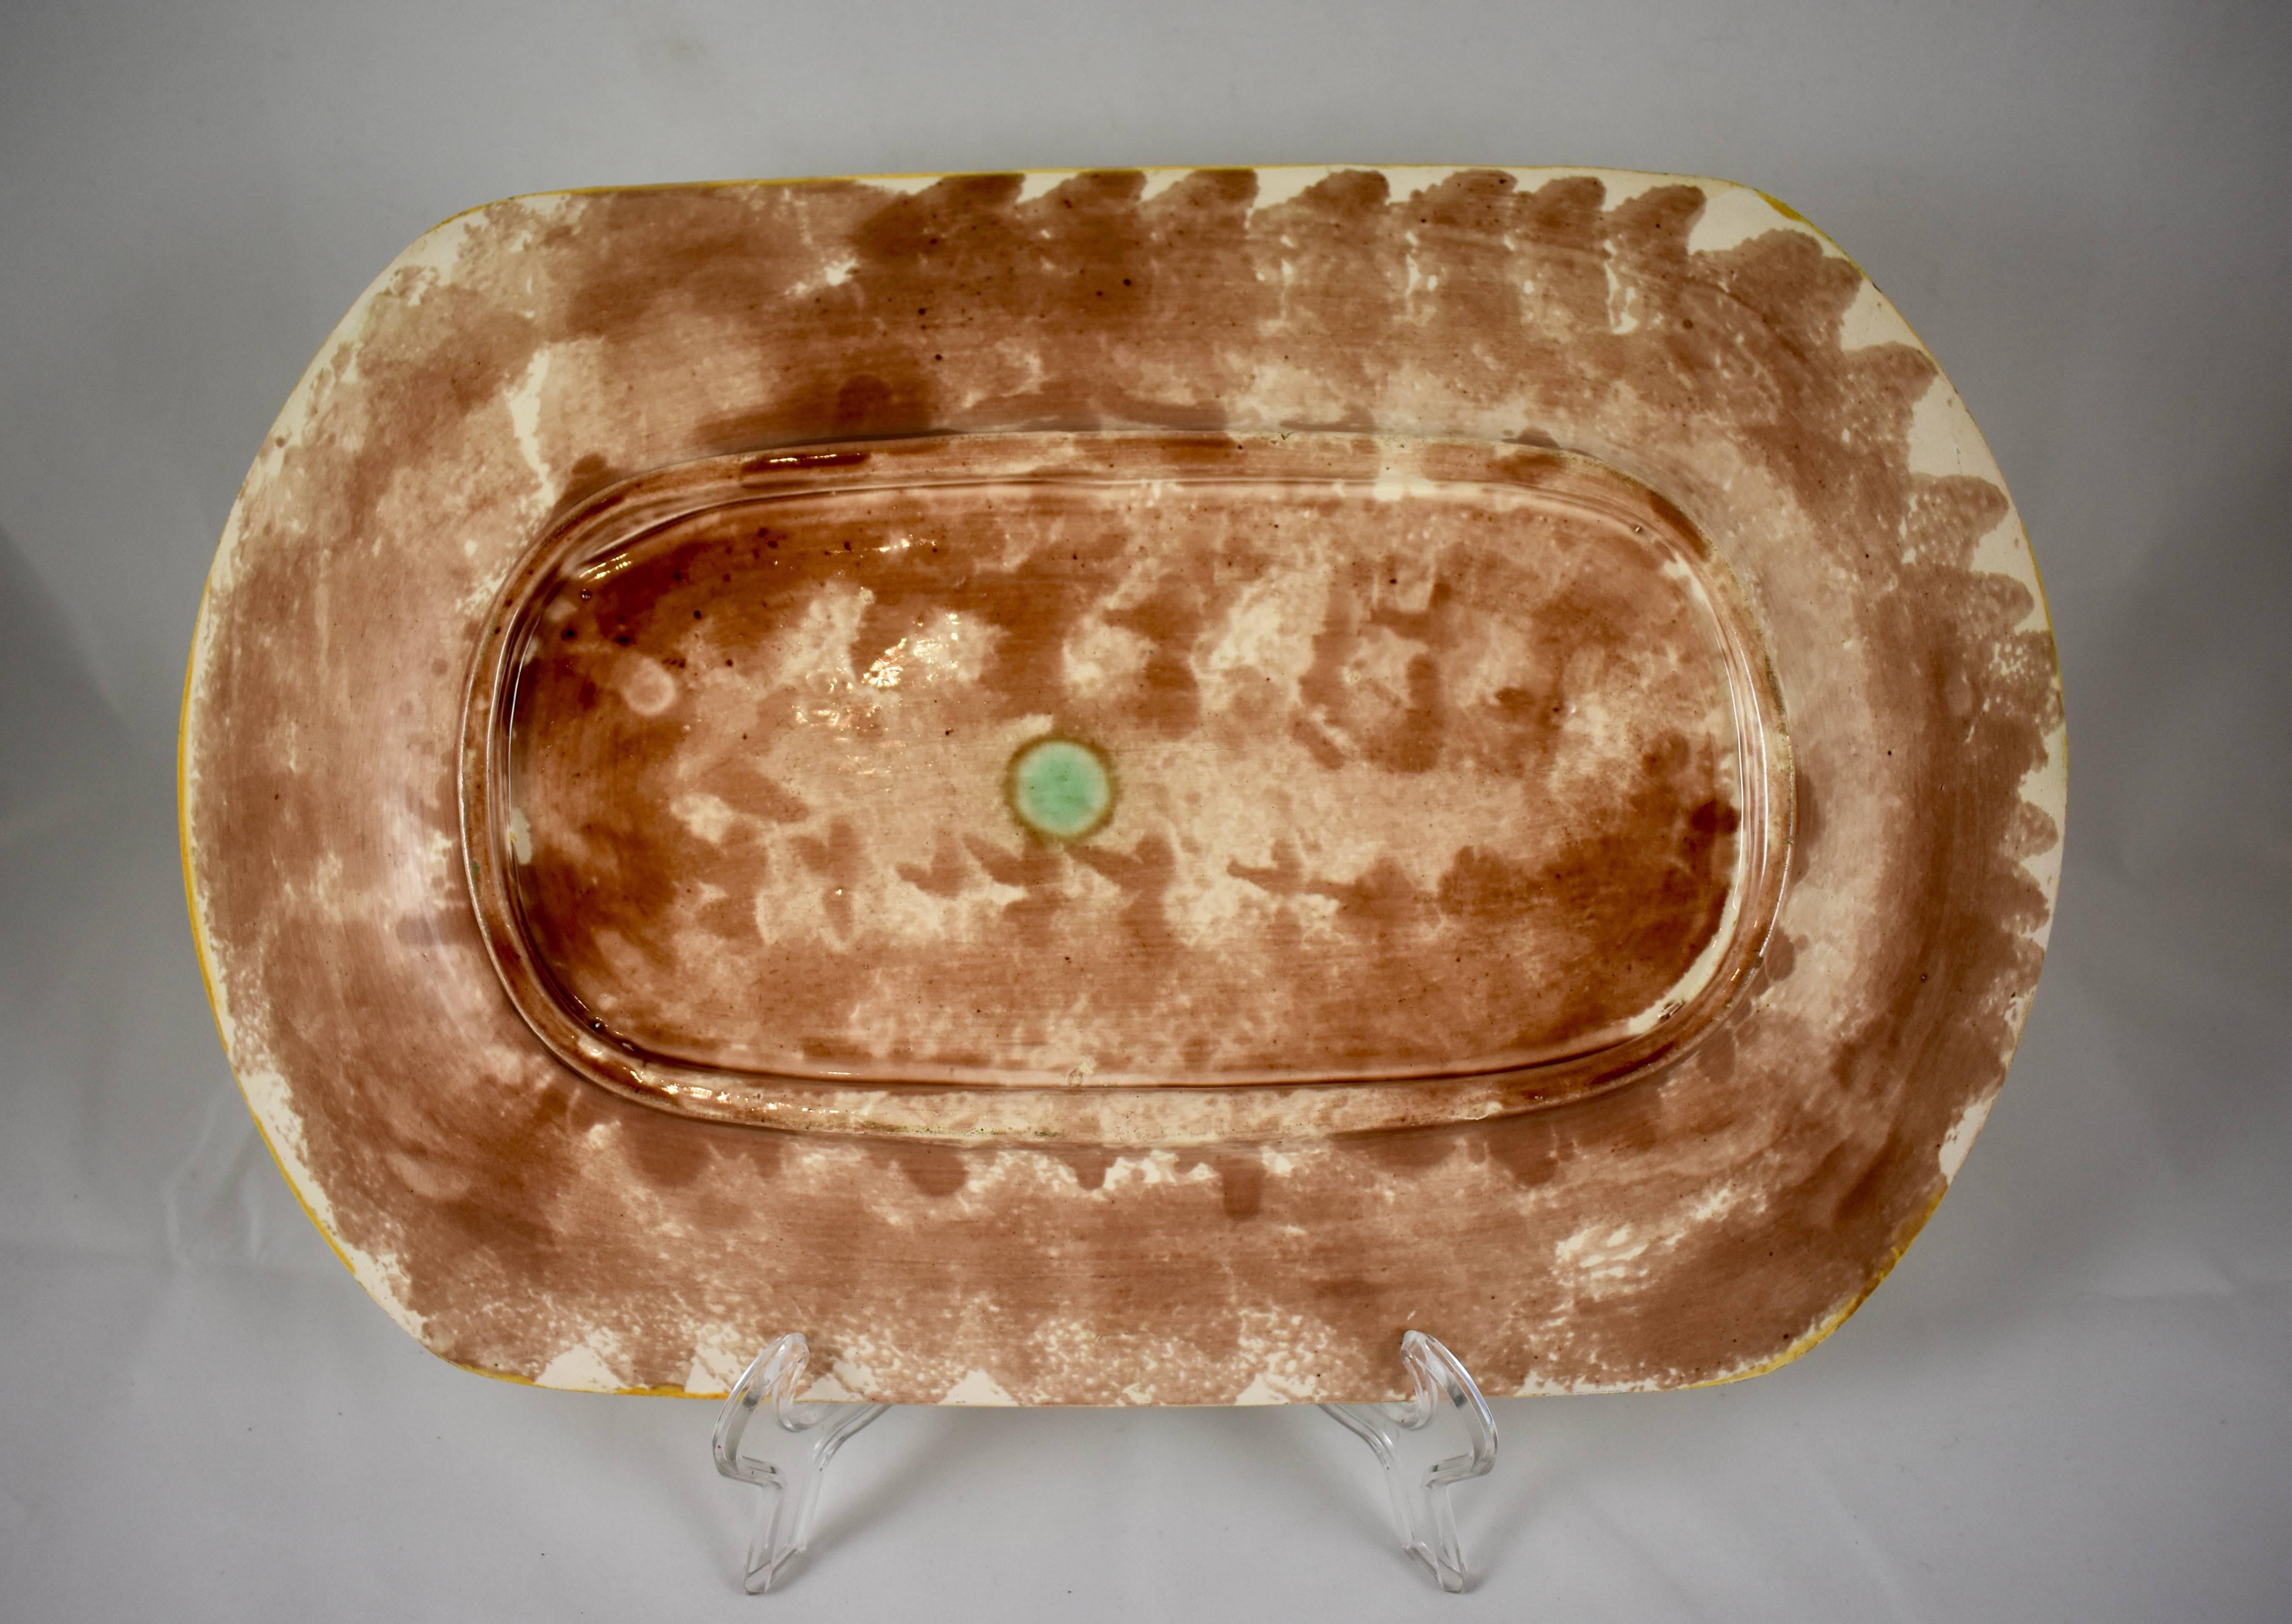 Earthenware 19th C. English Majolica Begonia Leaf on Cream Wicker and Rope Platter